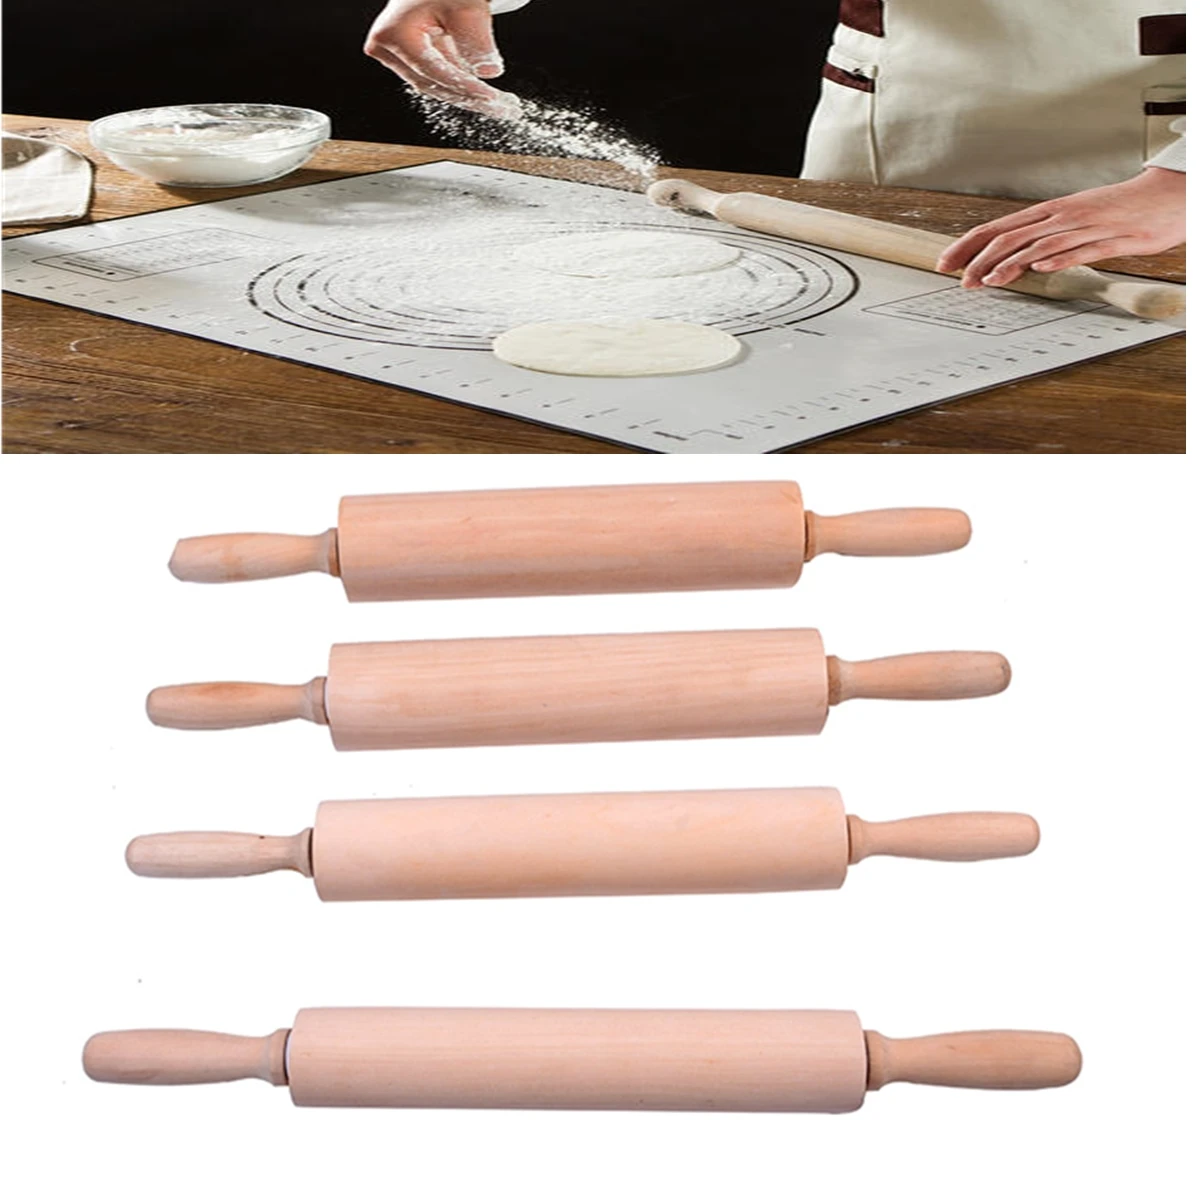 Home Indoor Kitchen Baking Cooking Decor Tools Wooden Cake Fondant Rolling Pin 